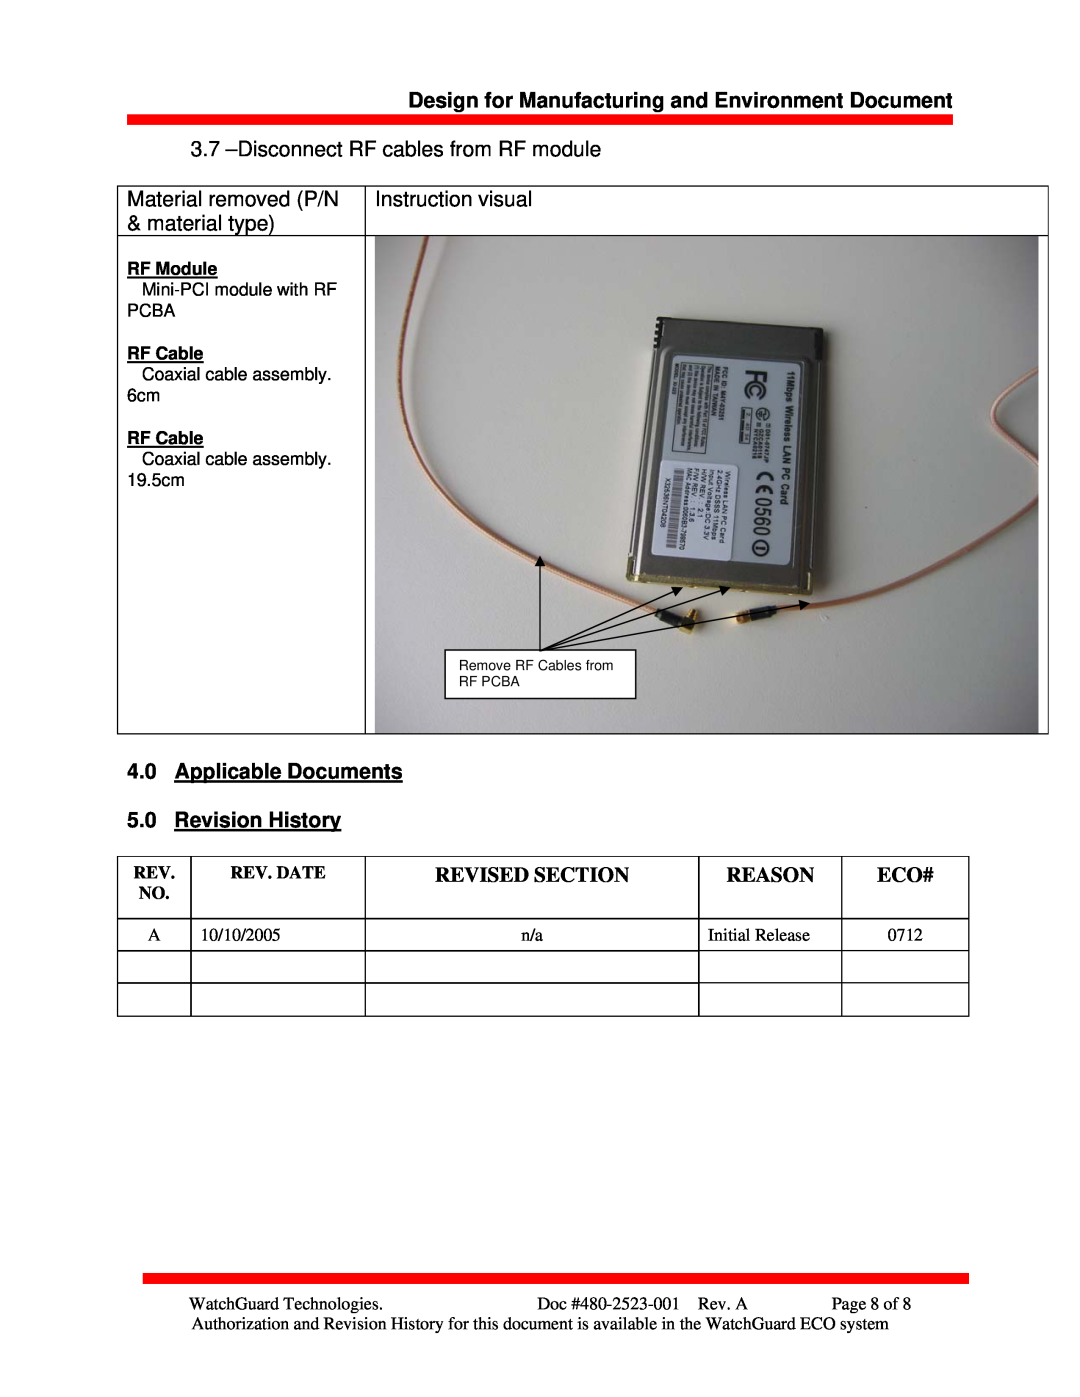 WatchGuard Technologies SOHO 6 Disconnect RF cables from RF module, Applicable Documents 5.0 Revision History, RF Module 